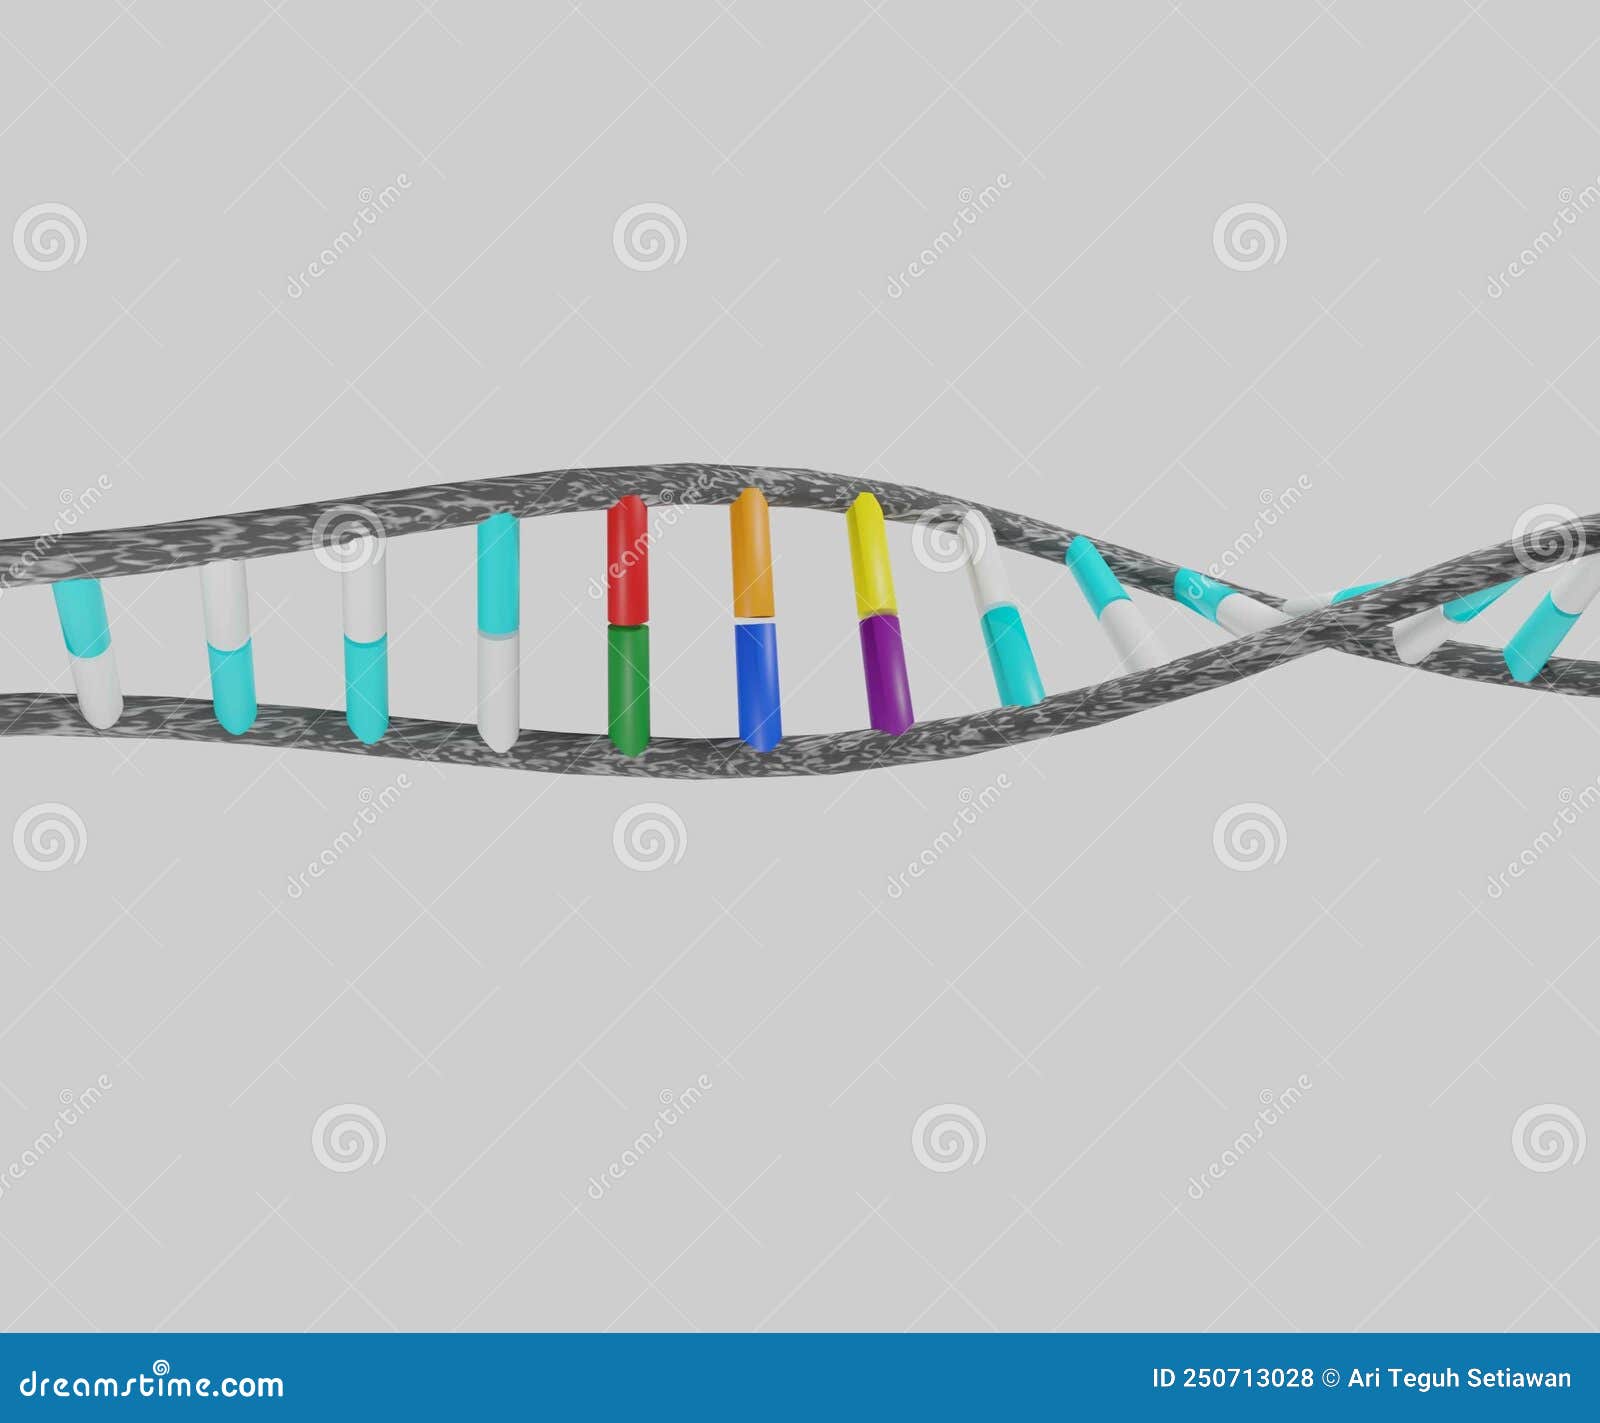 double-stranded dna gay genetic development of human sexual orientation